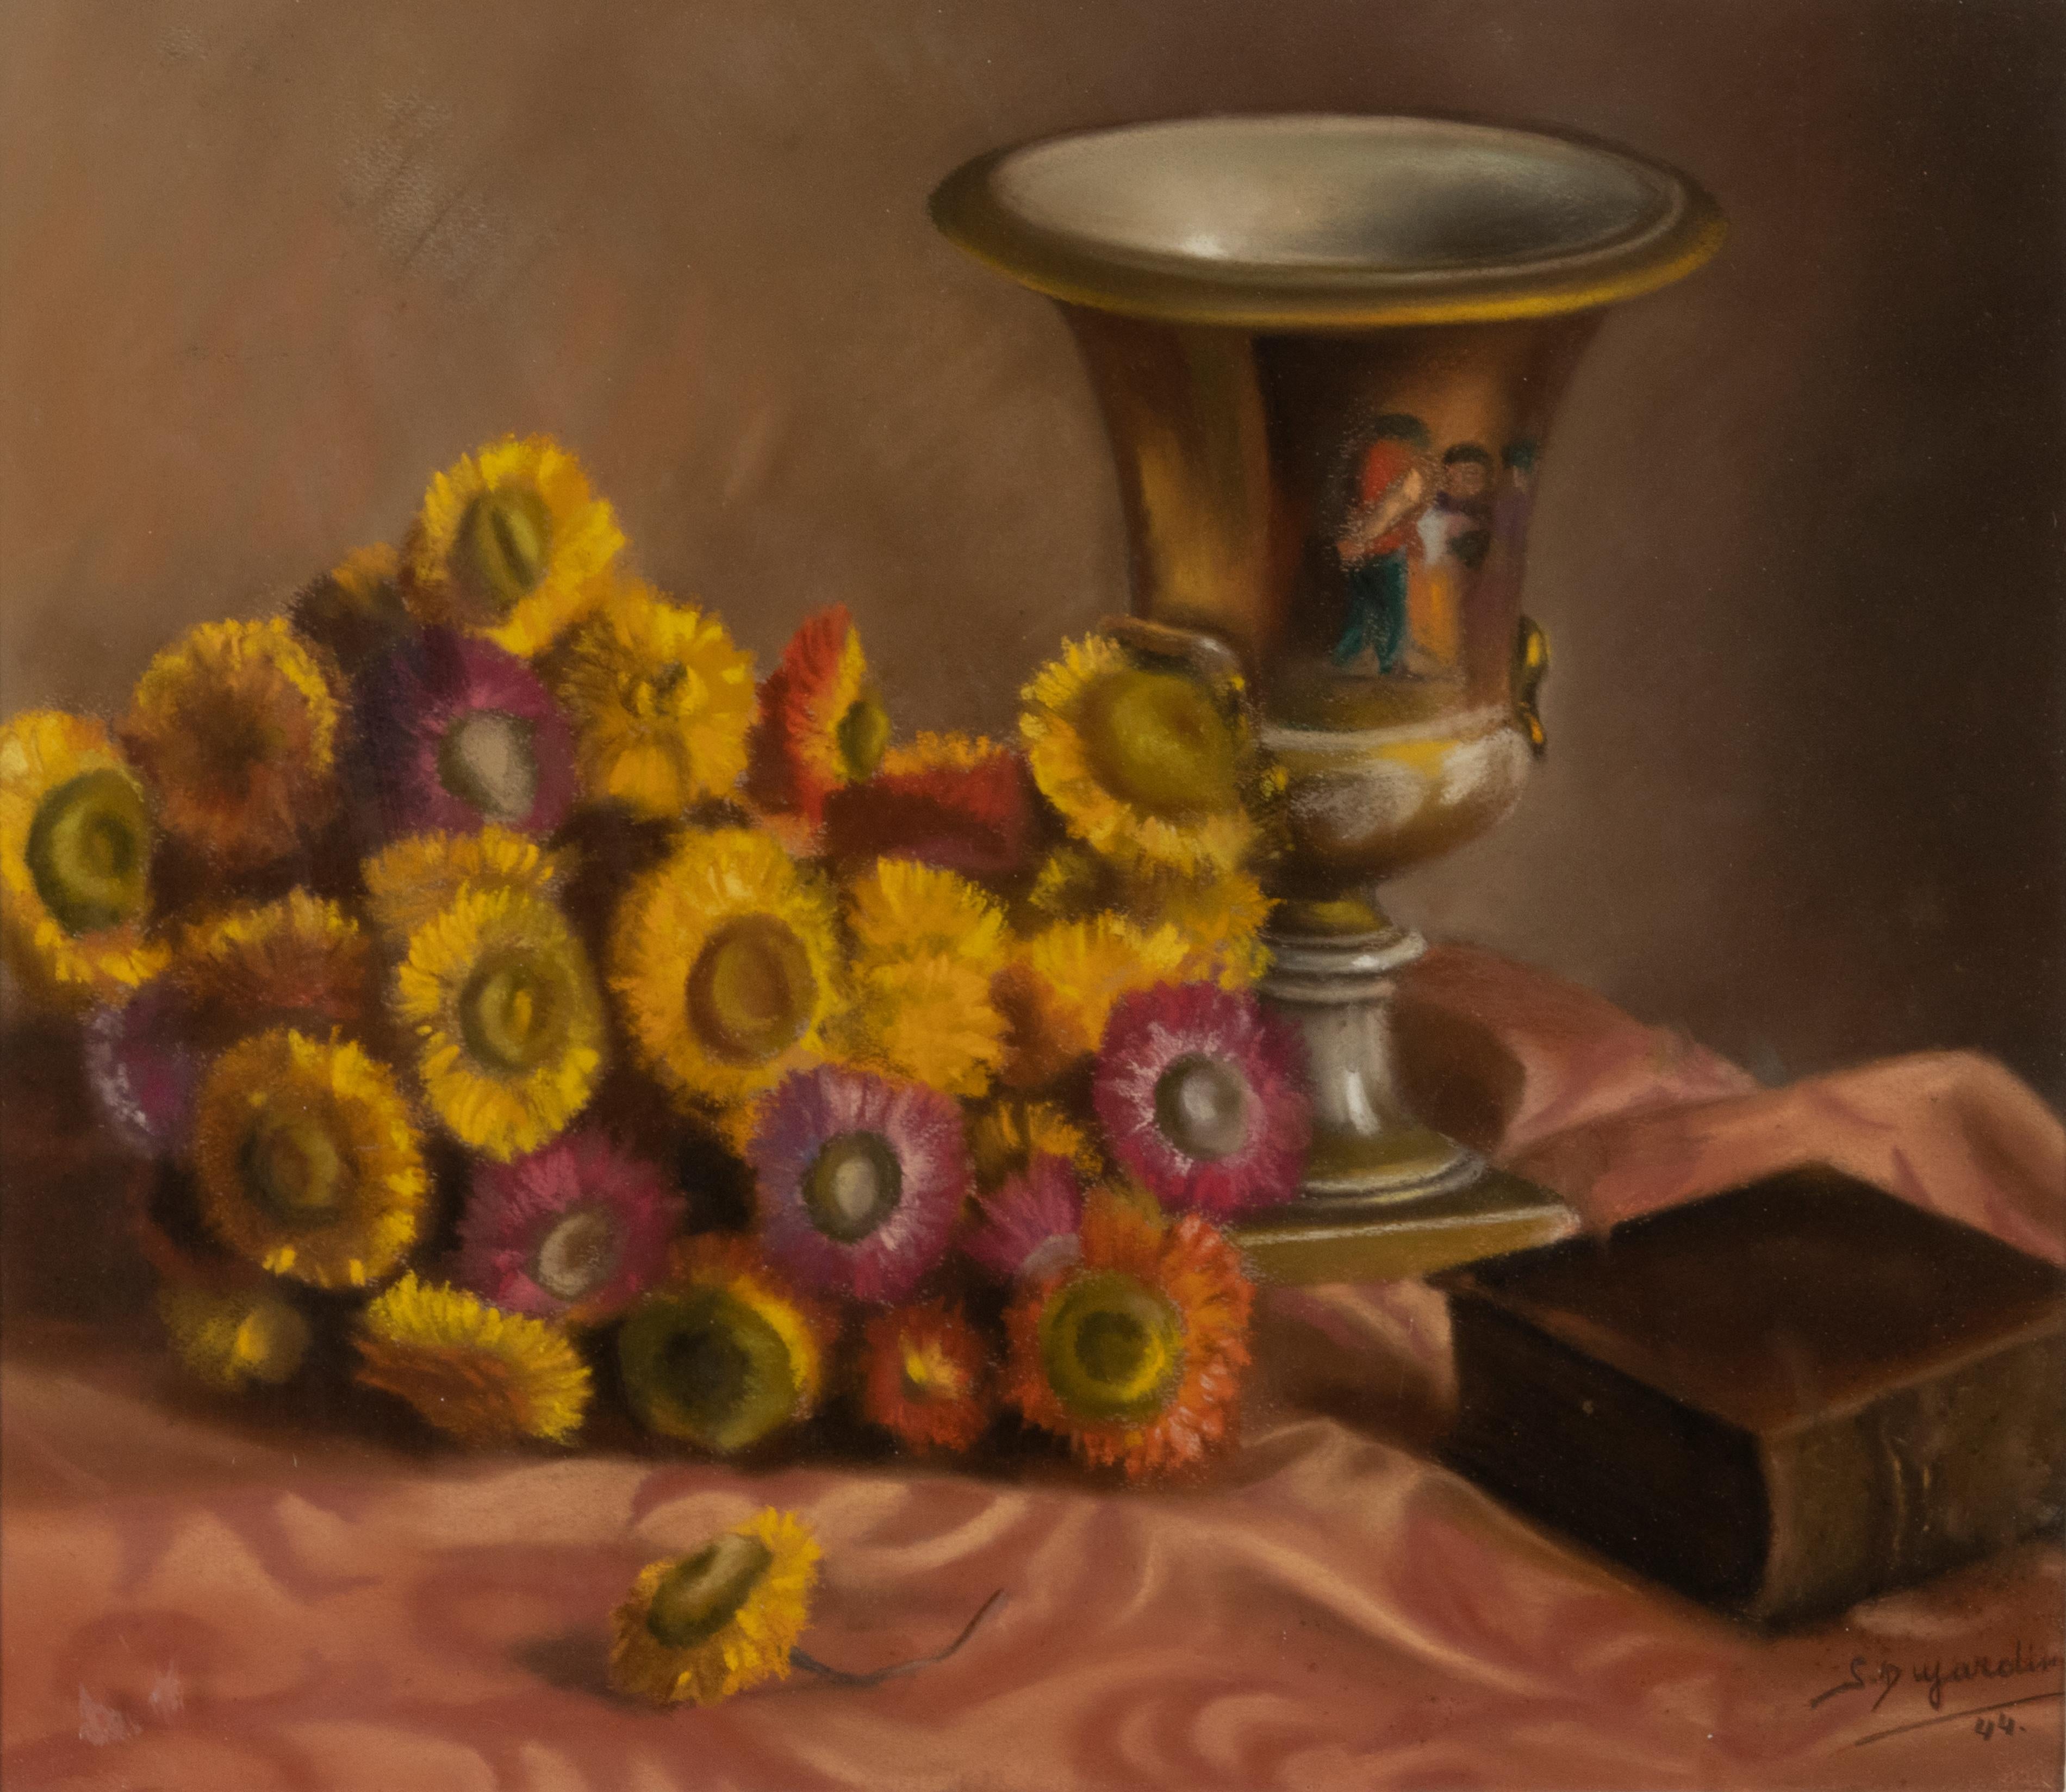 Beautiful flower still life, painted with soft pastels on paper, by the Belgium female artist Simone Dujardin. Signed and dated (1944) left under. The painting has a lively use of bright colors. The porcelain and book provides a nice balance in the